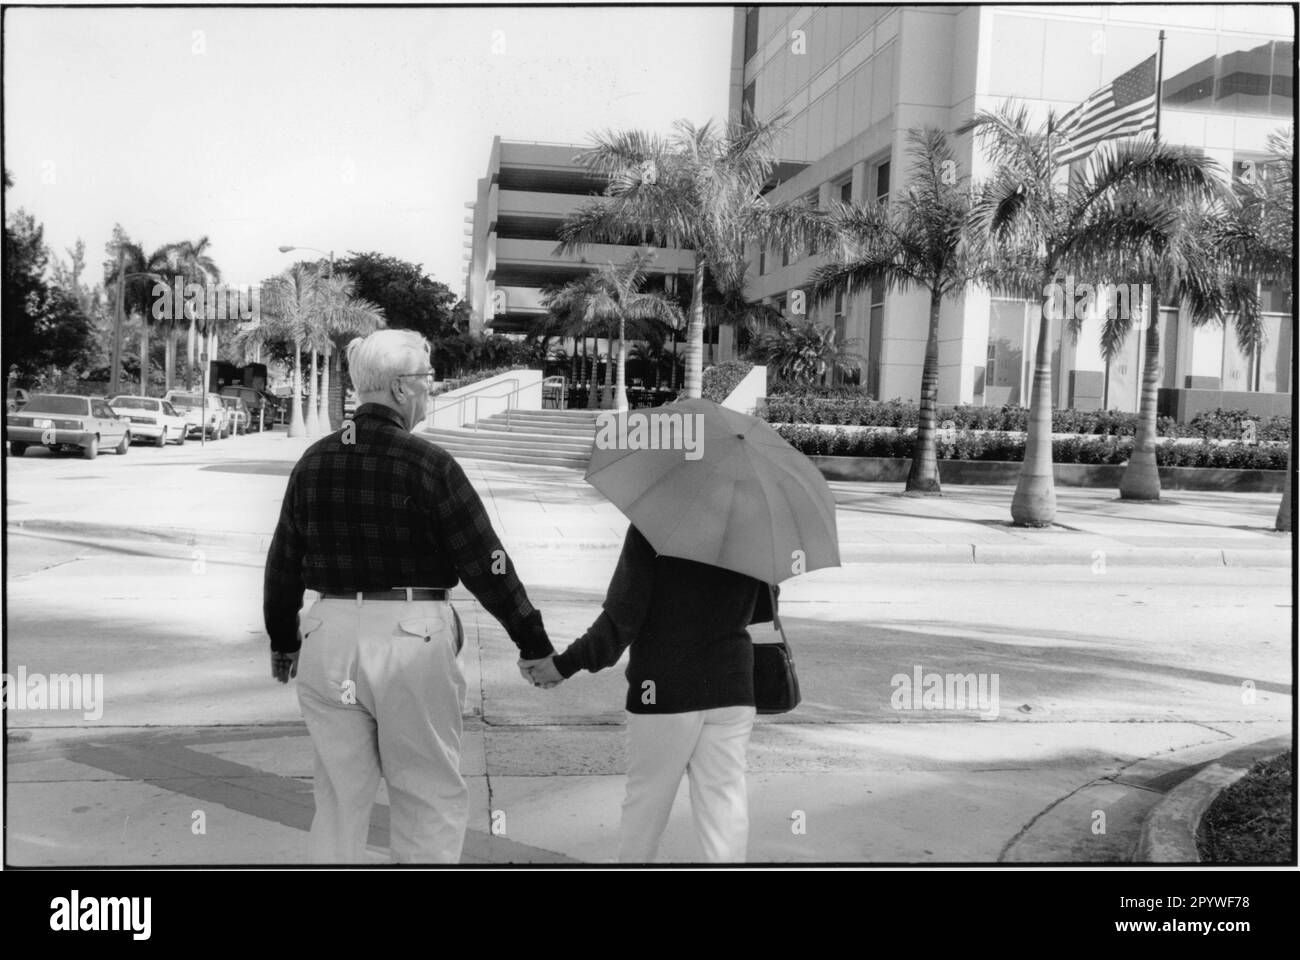 Love and marriage: married couples. Elderly couple in Miami (Florida, USA) with an umbrella as sun protection. Street scene, black and white. Photo, 1995. Stock Photo